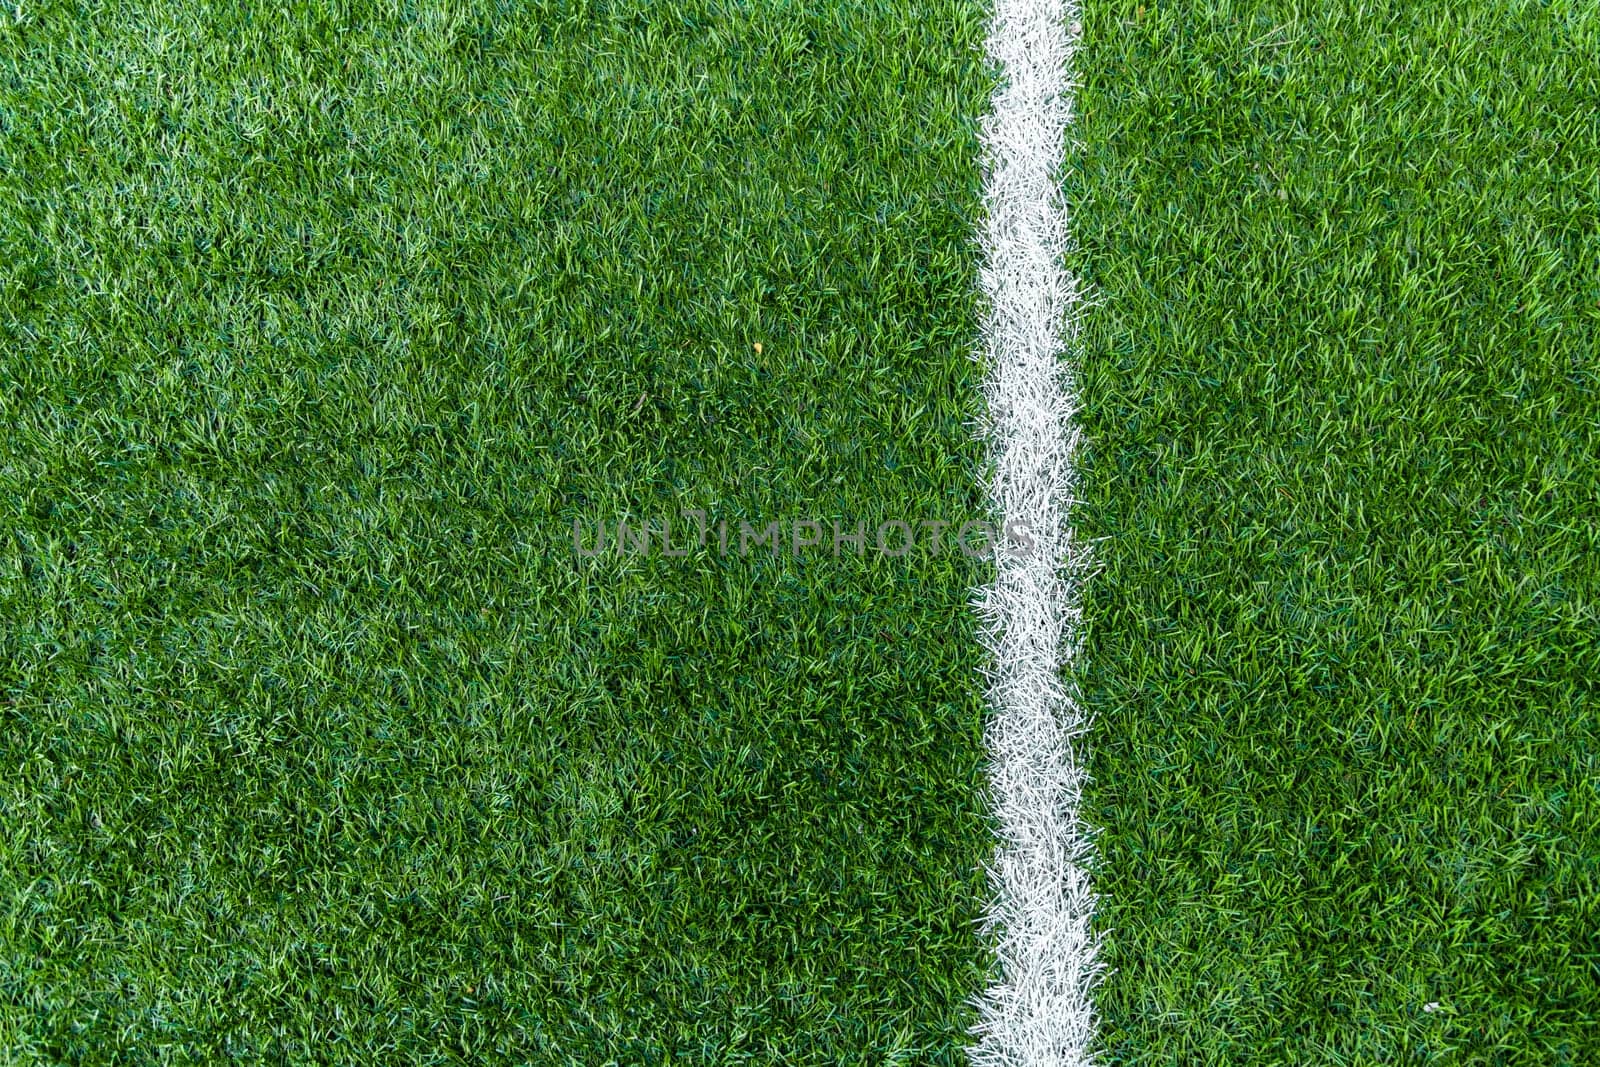 Vertical white stripe markings on the green grass of the football field.